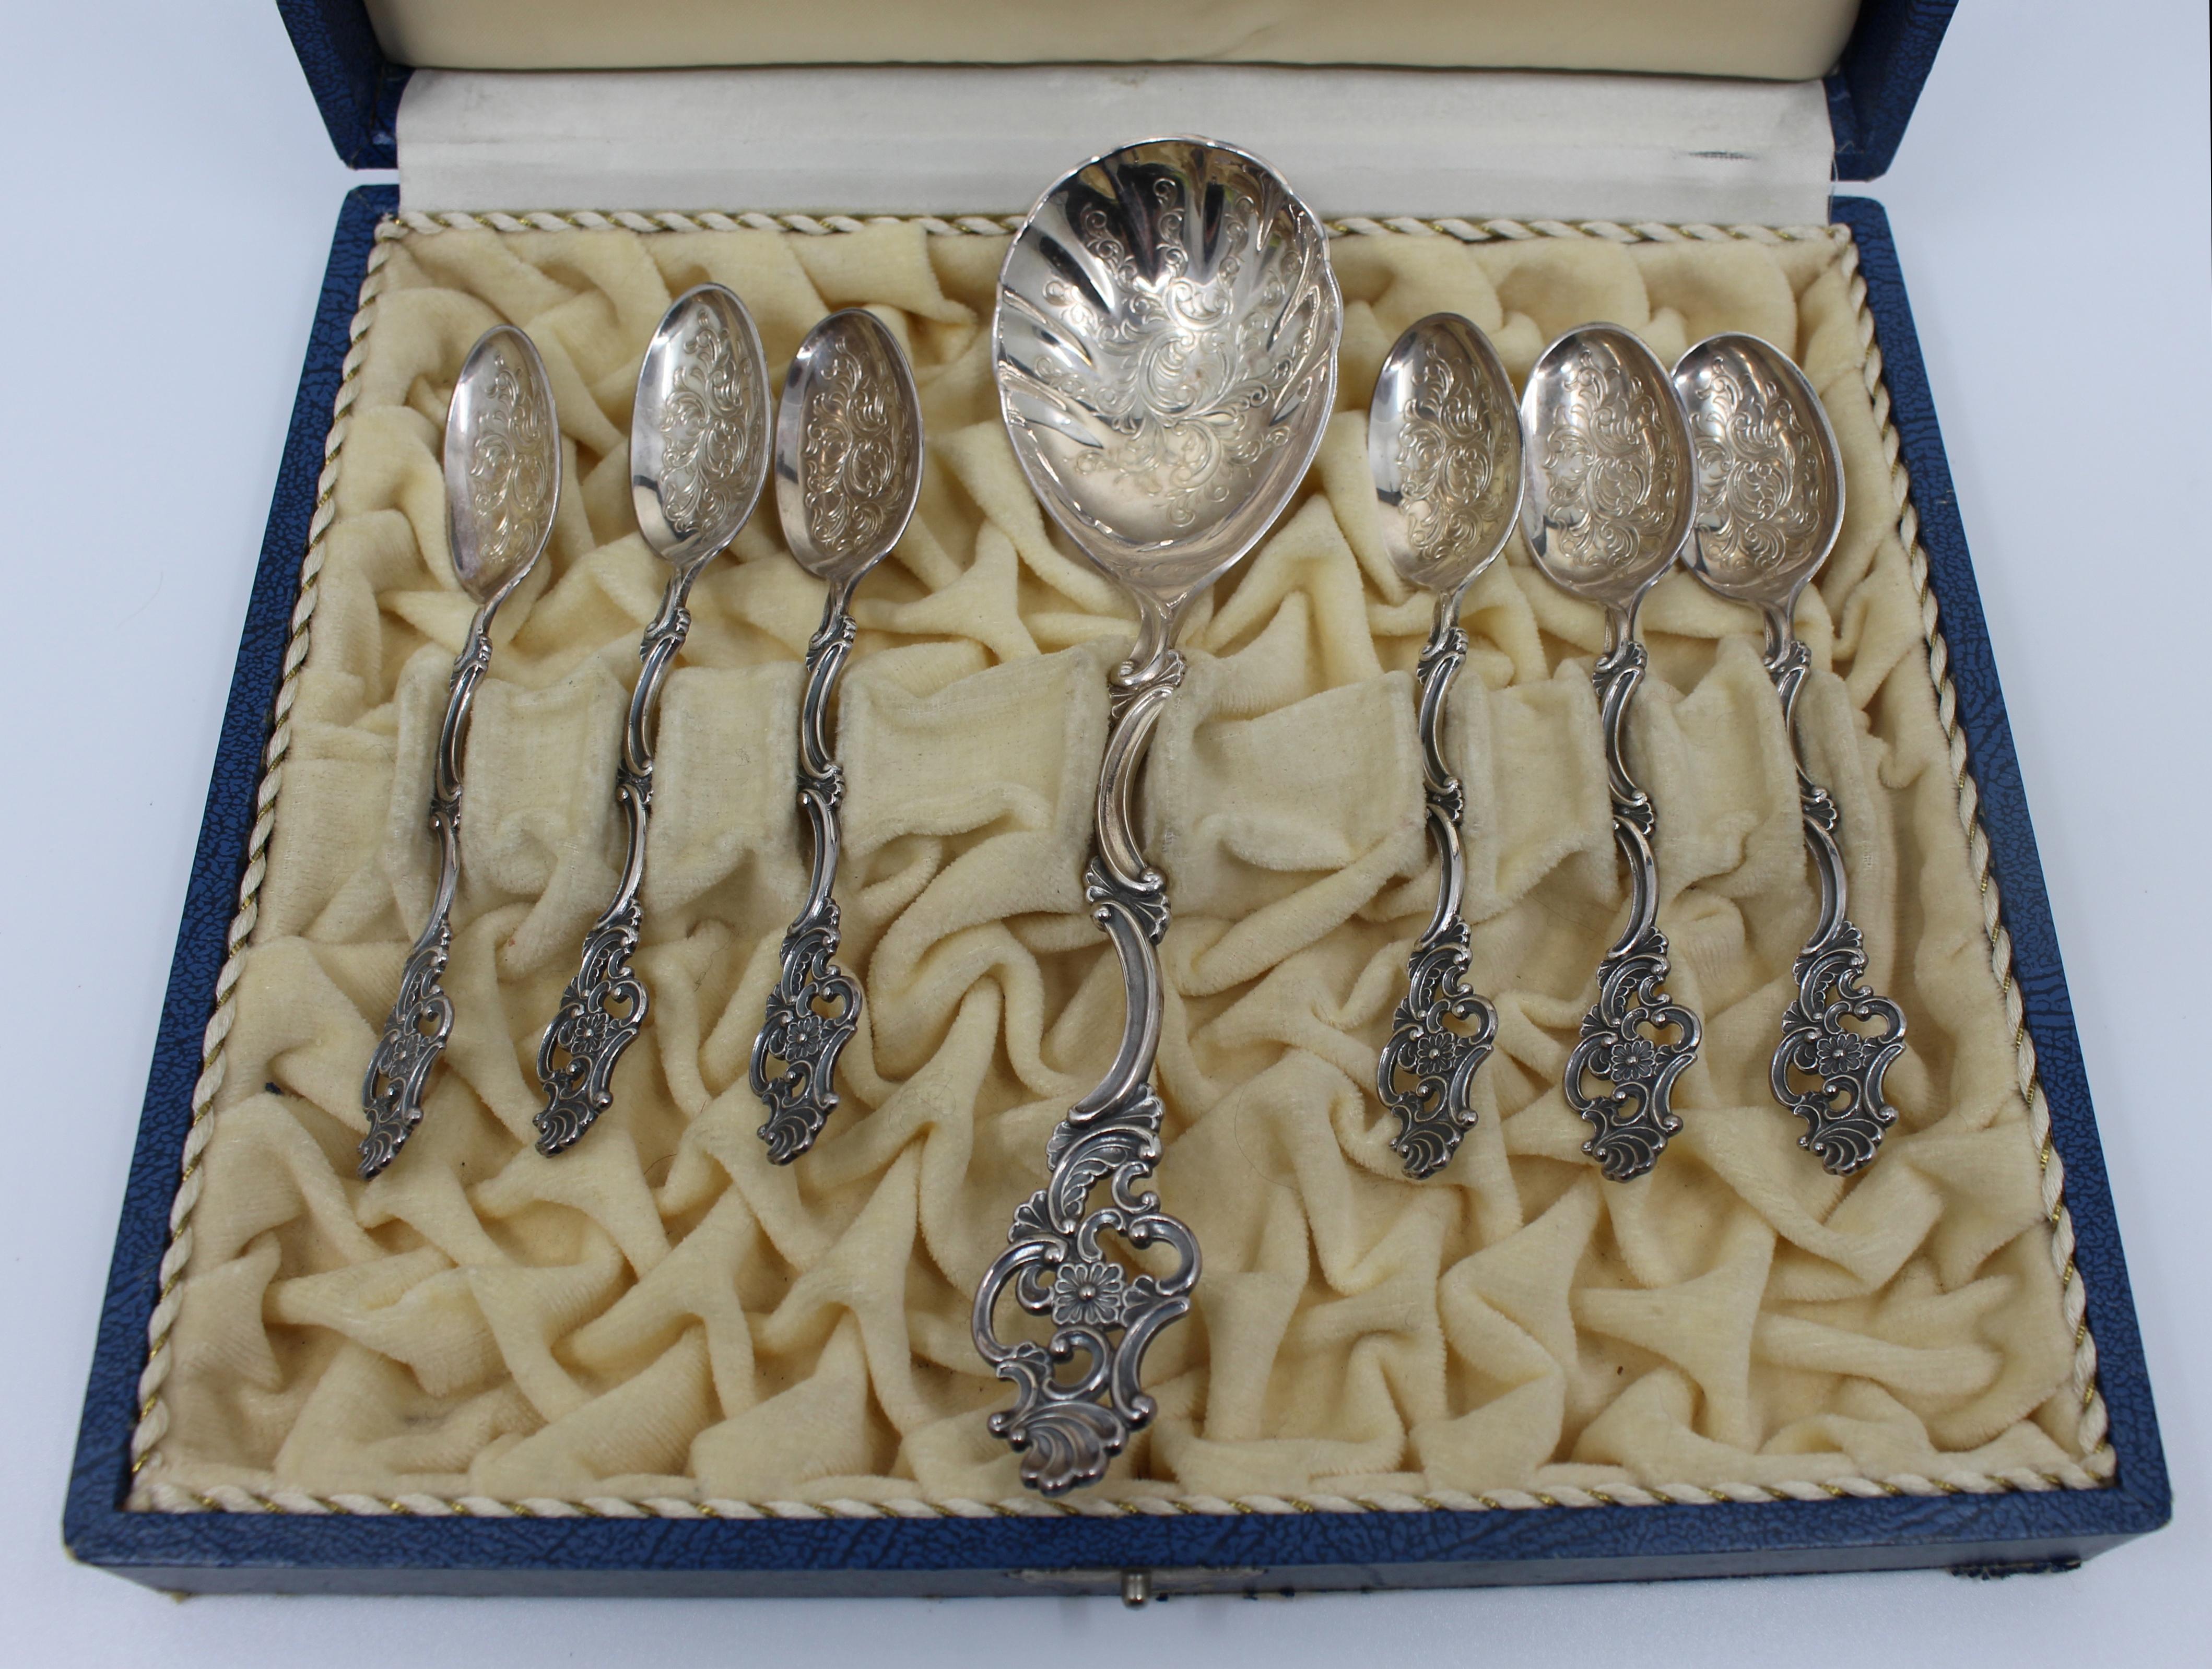 Period early 20th century, Norwegian
Maker Thorvald Marthinsen Sølvvarefabrik, Tonsberg
Measures: Tea spoon length 11 cm / 4 1/2 in
Serving spoon length 17 cm / 6 1/2 in
Total weight 97.9 g
Condition very good condition. Fully hallmarked. Set